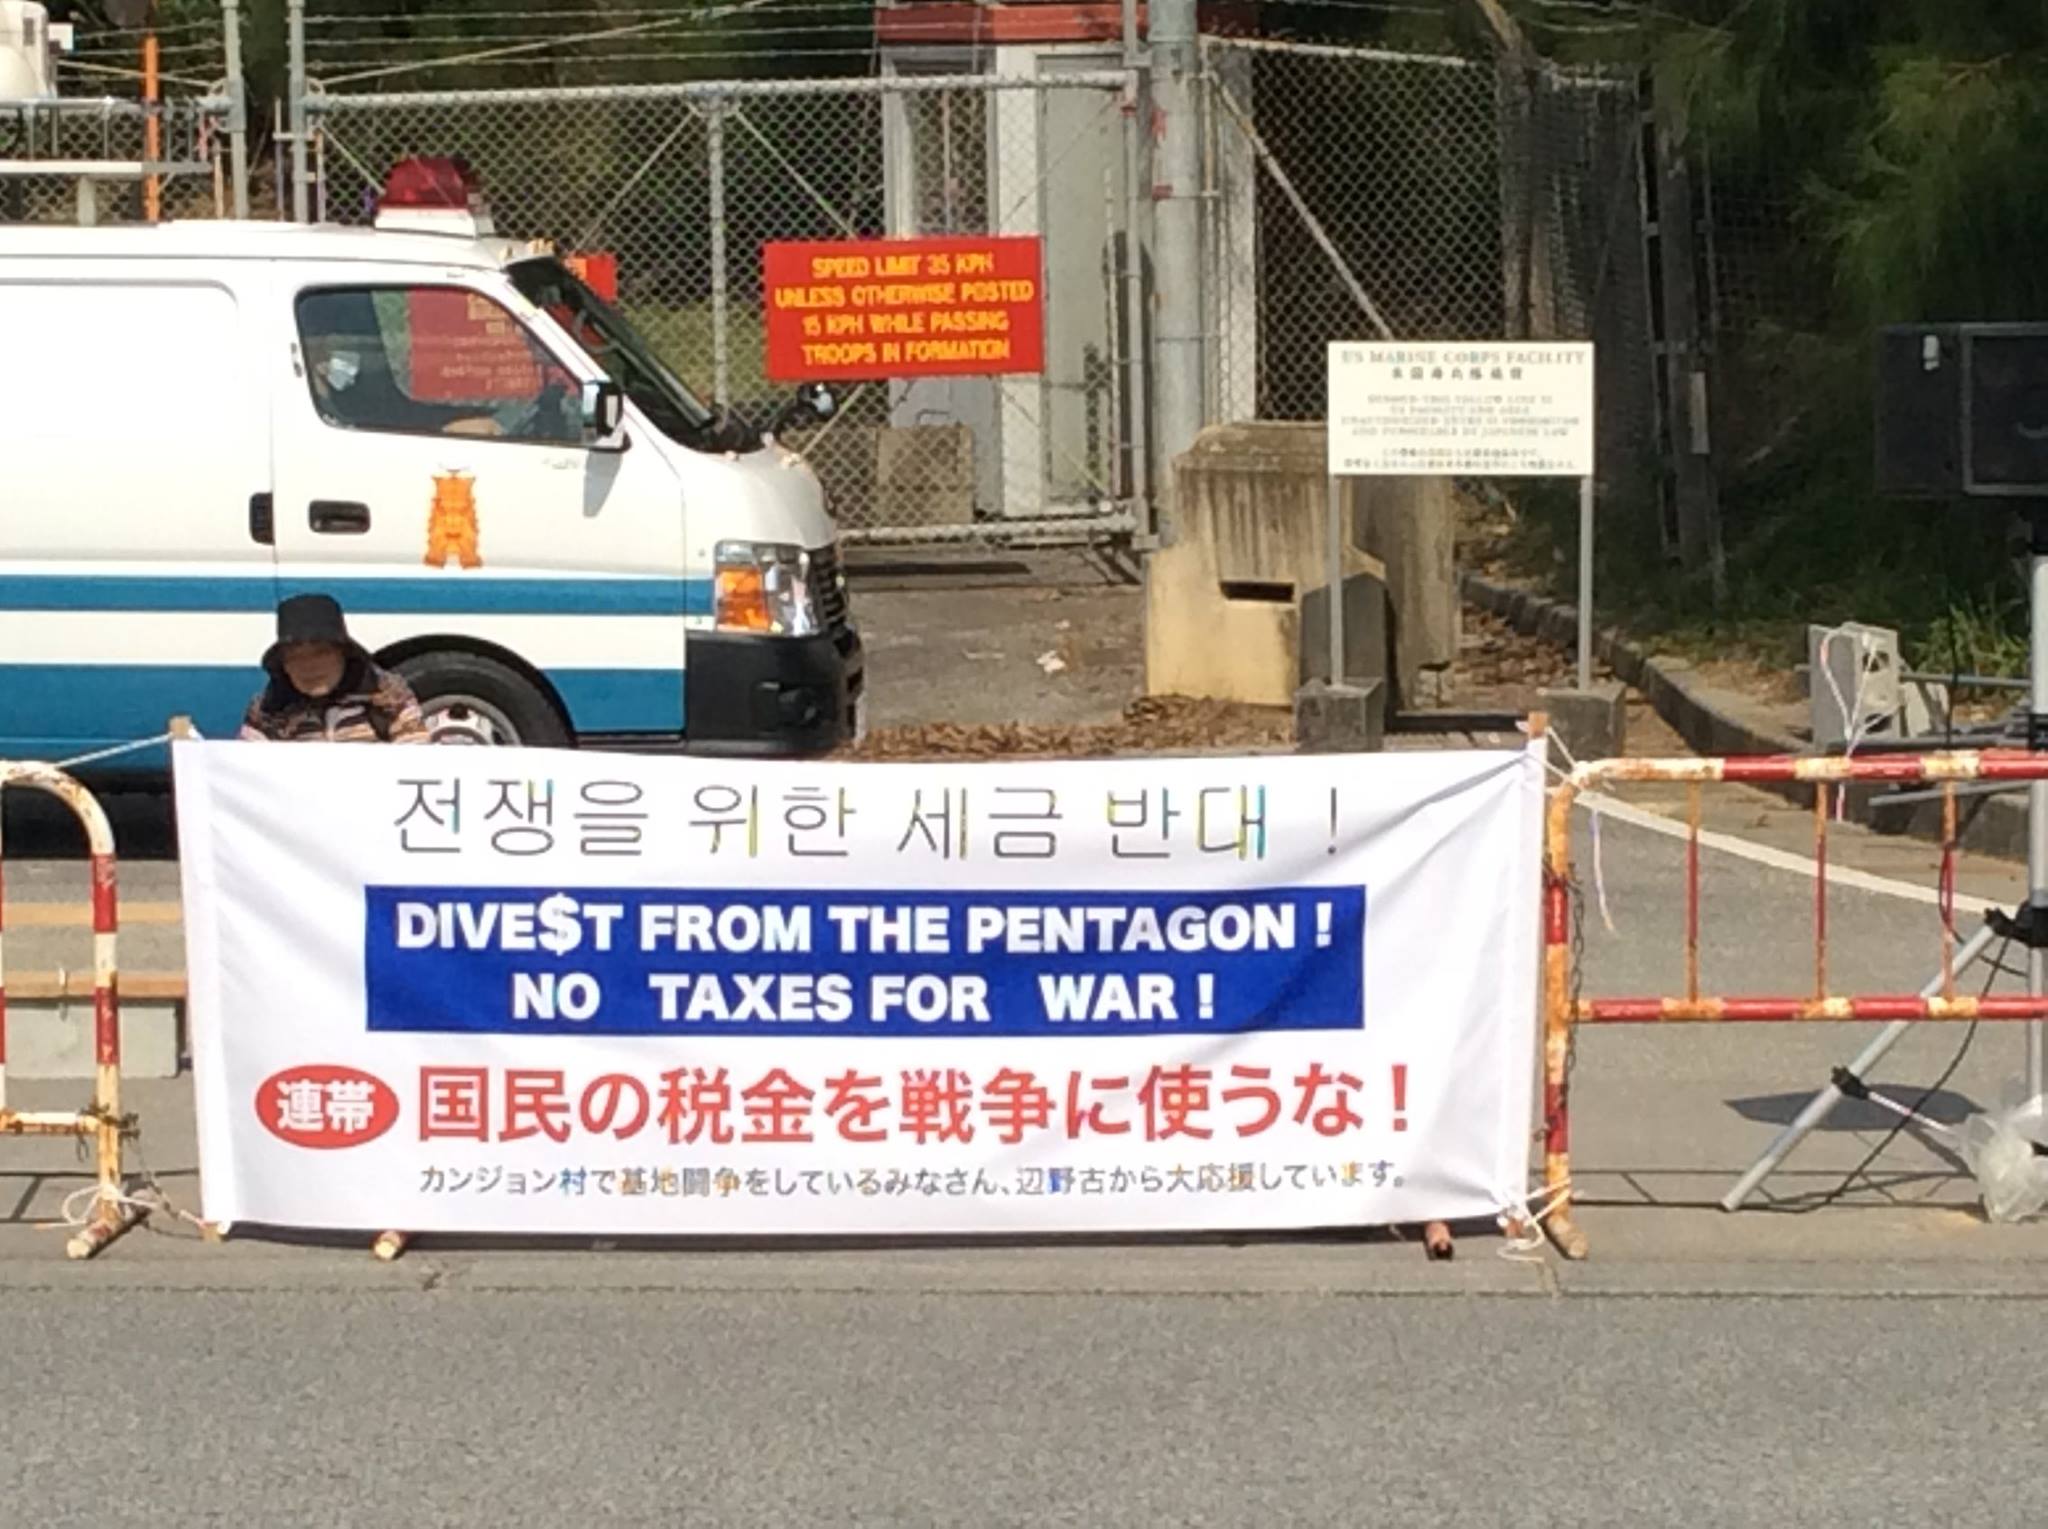 Divest from the Pentagon! No taxes for war!